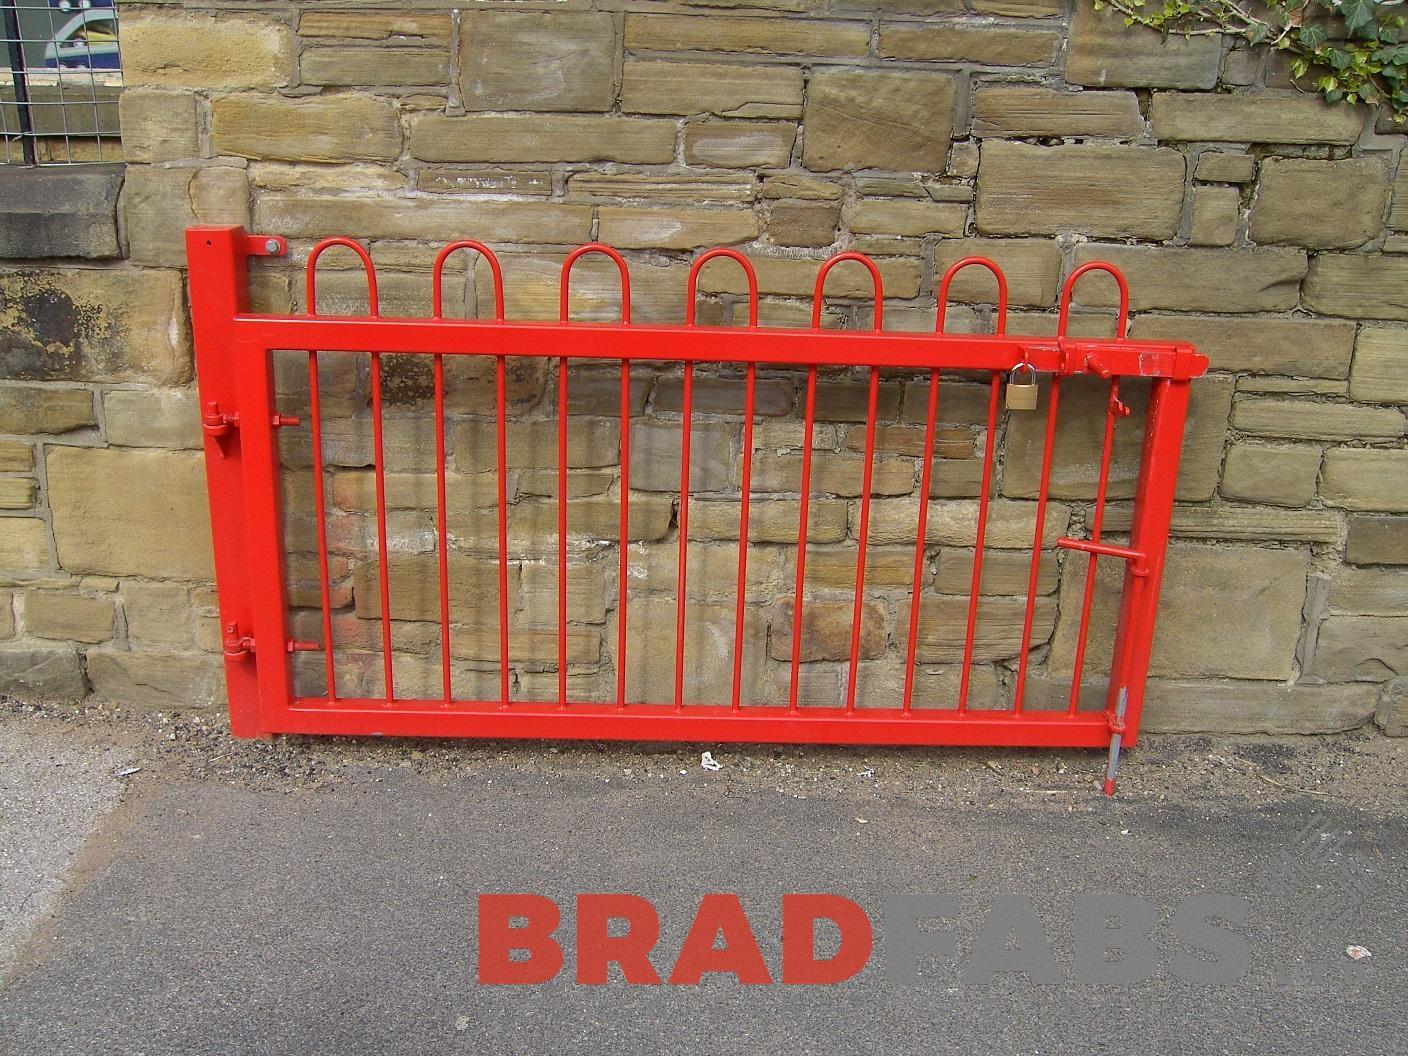 Primary School red small metal gate